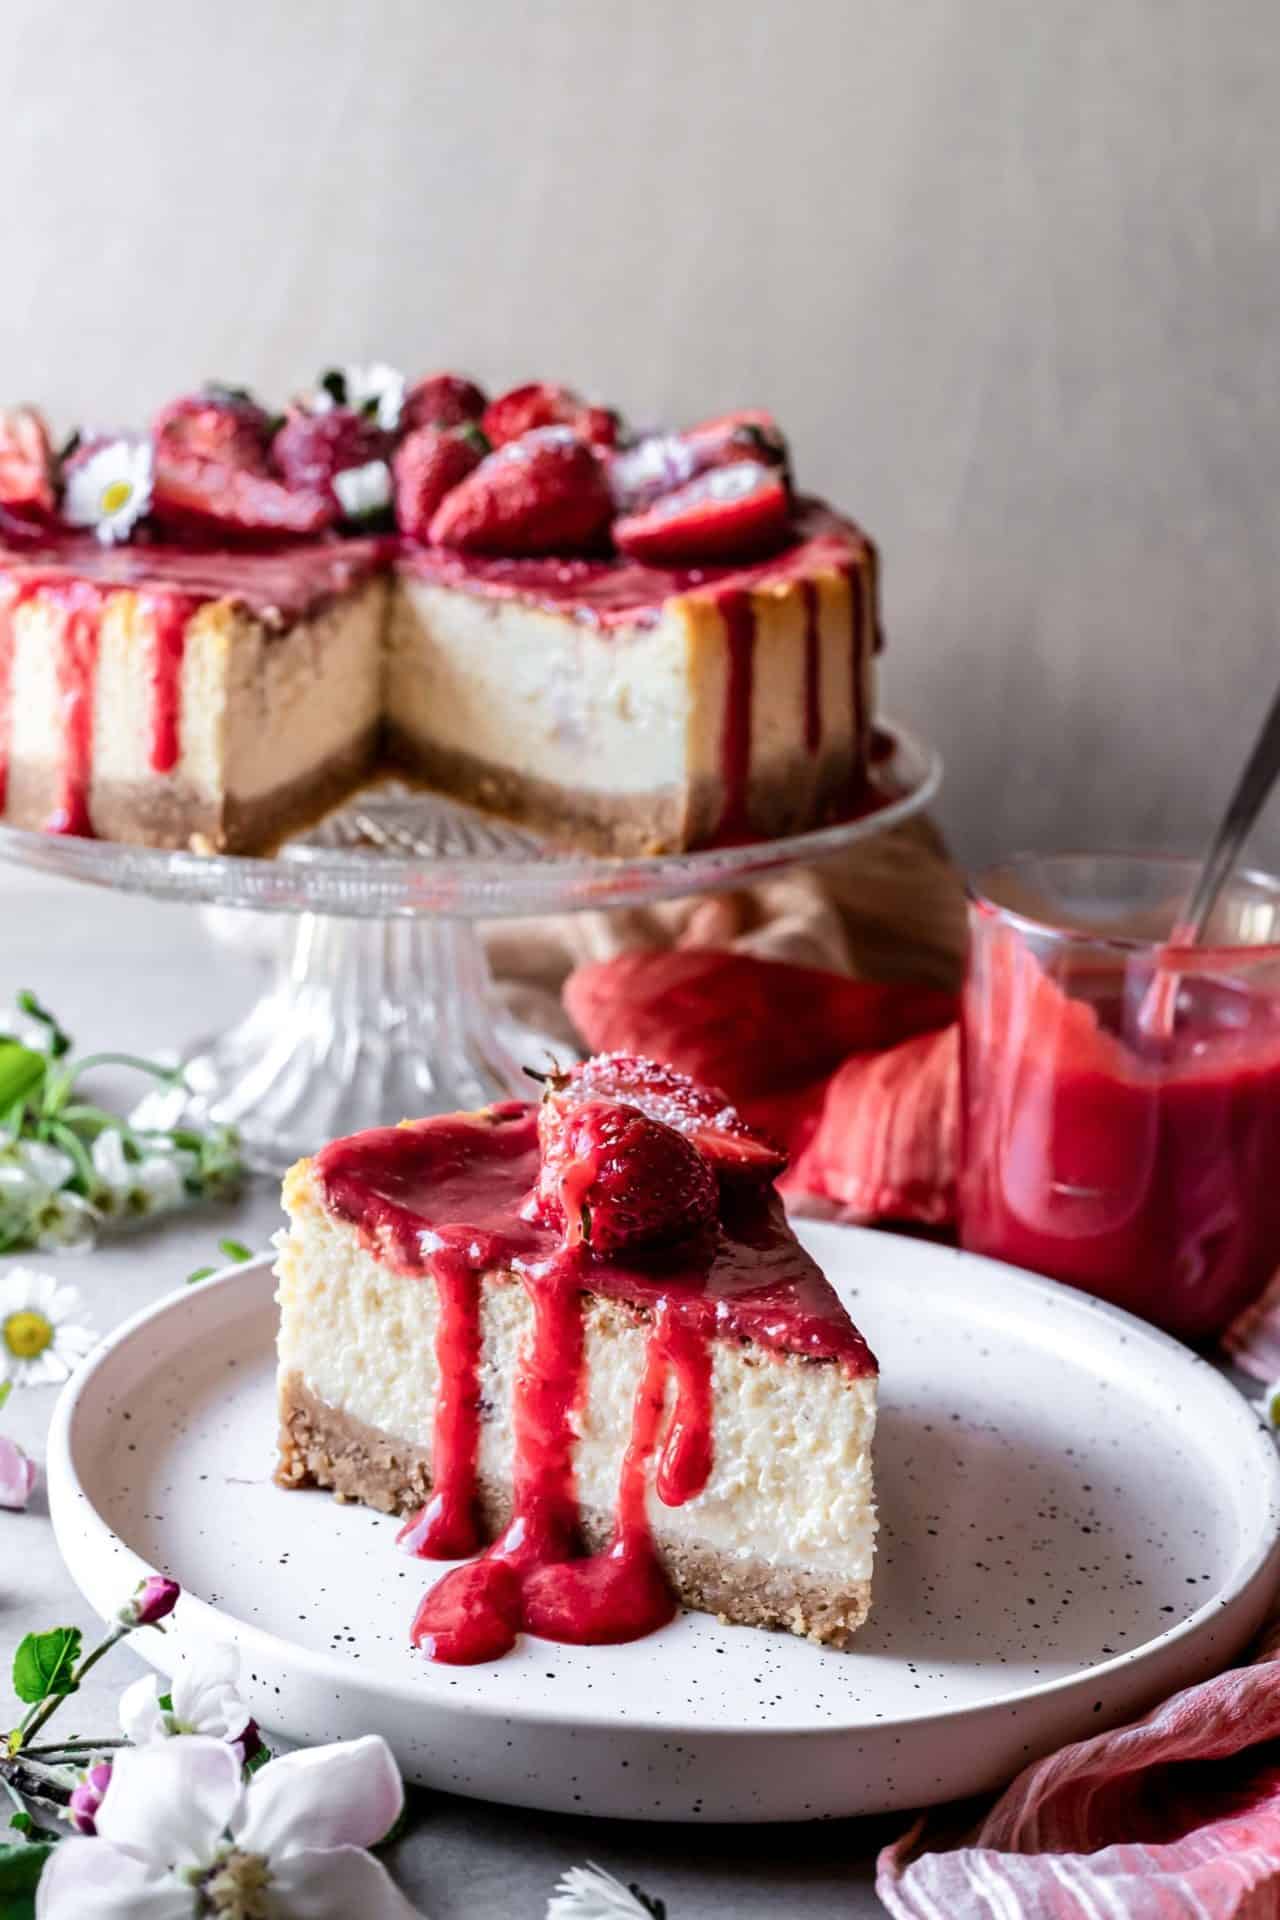 This Gluten-Free New York Cheesecake is super creamy, perfectly sweet, tangy, and slightly citrusy, rich, flavorful, and insanely delicious!